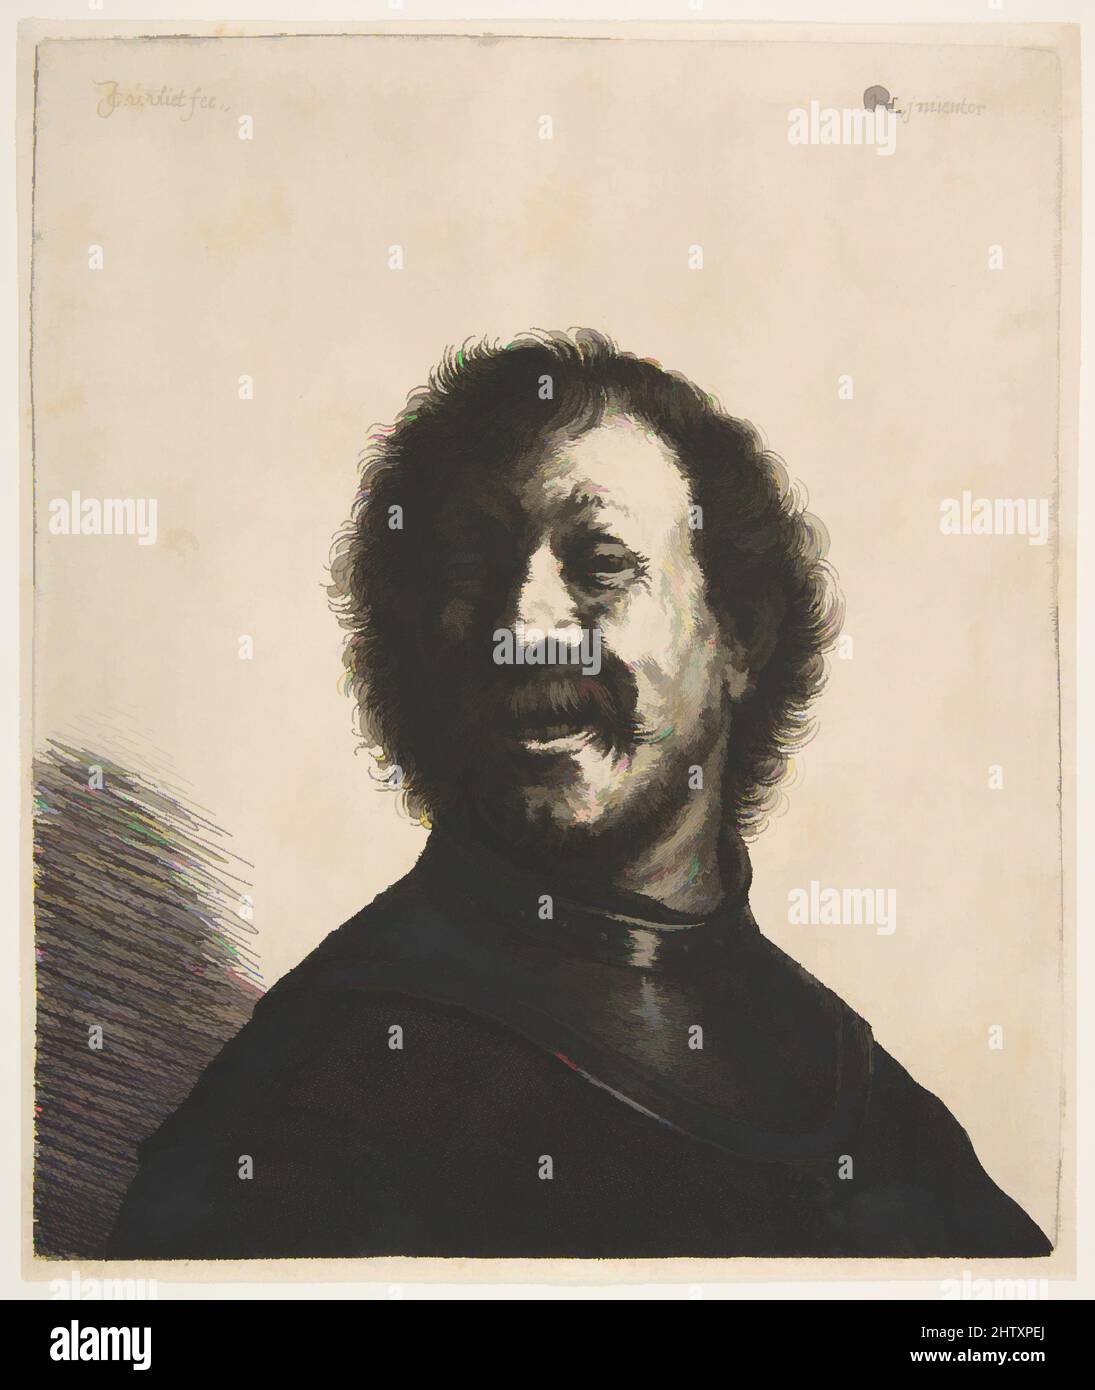 Art inspired by Laughing Man in a Gorget, 1625–40, Etching; first state of two, sheet: 9 3/16 x 7 11/16 in. (23.3 x 19.6 cm), Prints, Jan Georg (Joris) van Vliet (Dutch, Deft ca. 1610–ca. 1635), After Rembrandt (Rembrandt van Rijn) (Dutch, Leiden 1606–1669 Amsterdam, Classic works modernized by Artotop with a splash of modernity. Shapes, color and value, eye-catching visual impact on art. Emotions through freedom of artworks in a contemporary way. A timeless message pursuing a wildly creative new direction. Artists turning to the digital medium and creating the Artotop NFT Stock Photo